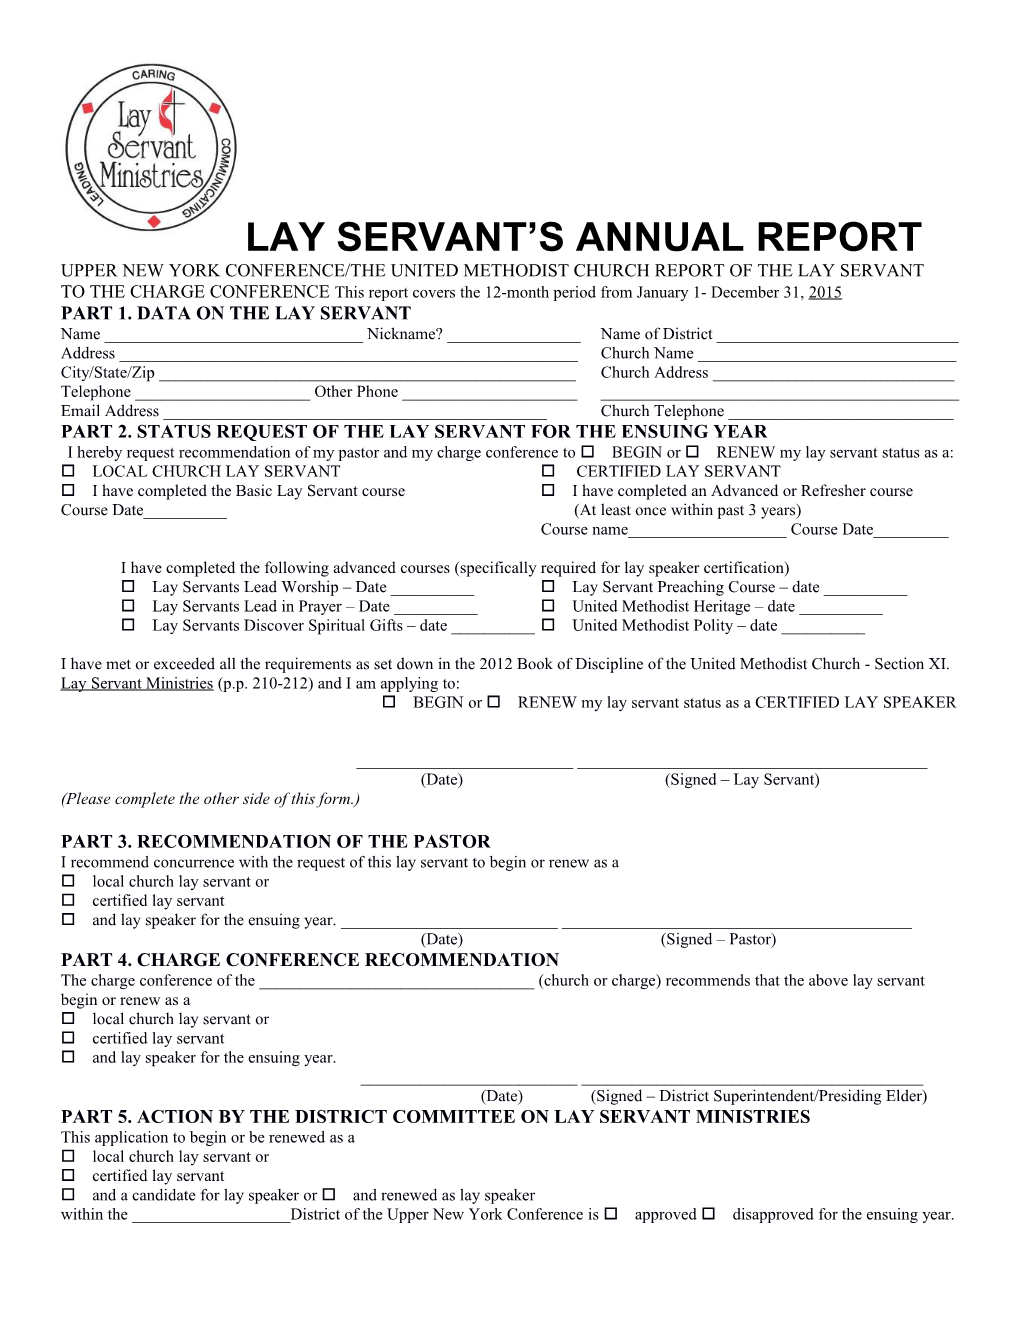 Upper New York Conference/The United Methodist Churchreport of the Lay Servant